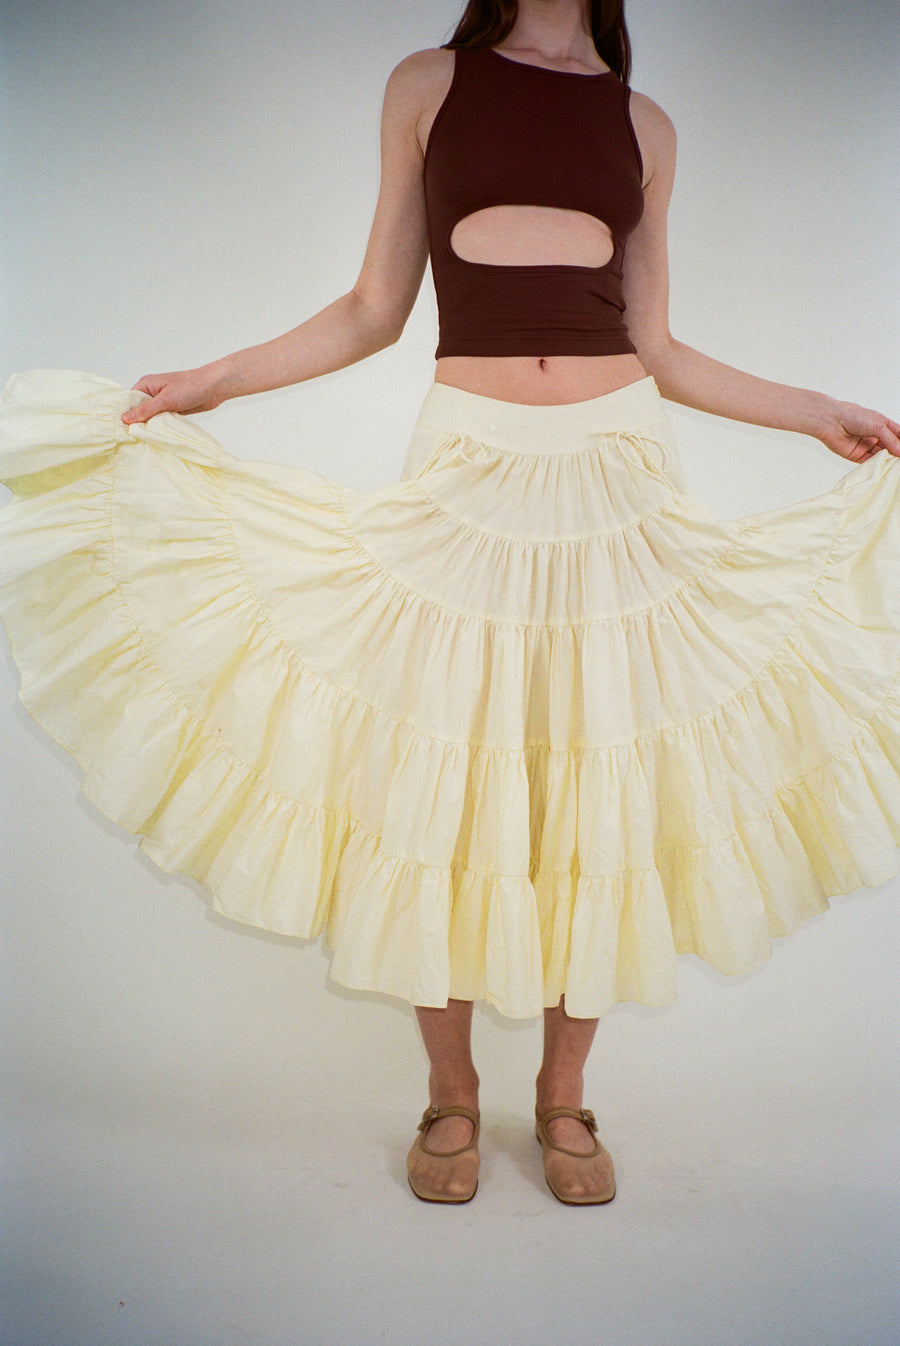 Midi length skirt in yellow with tiered construction on model